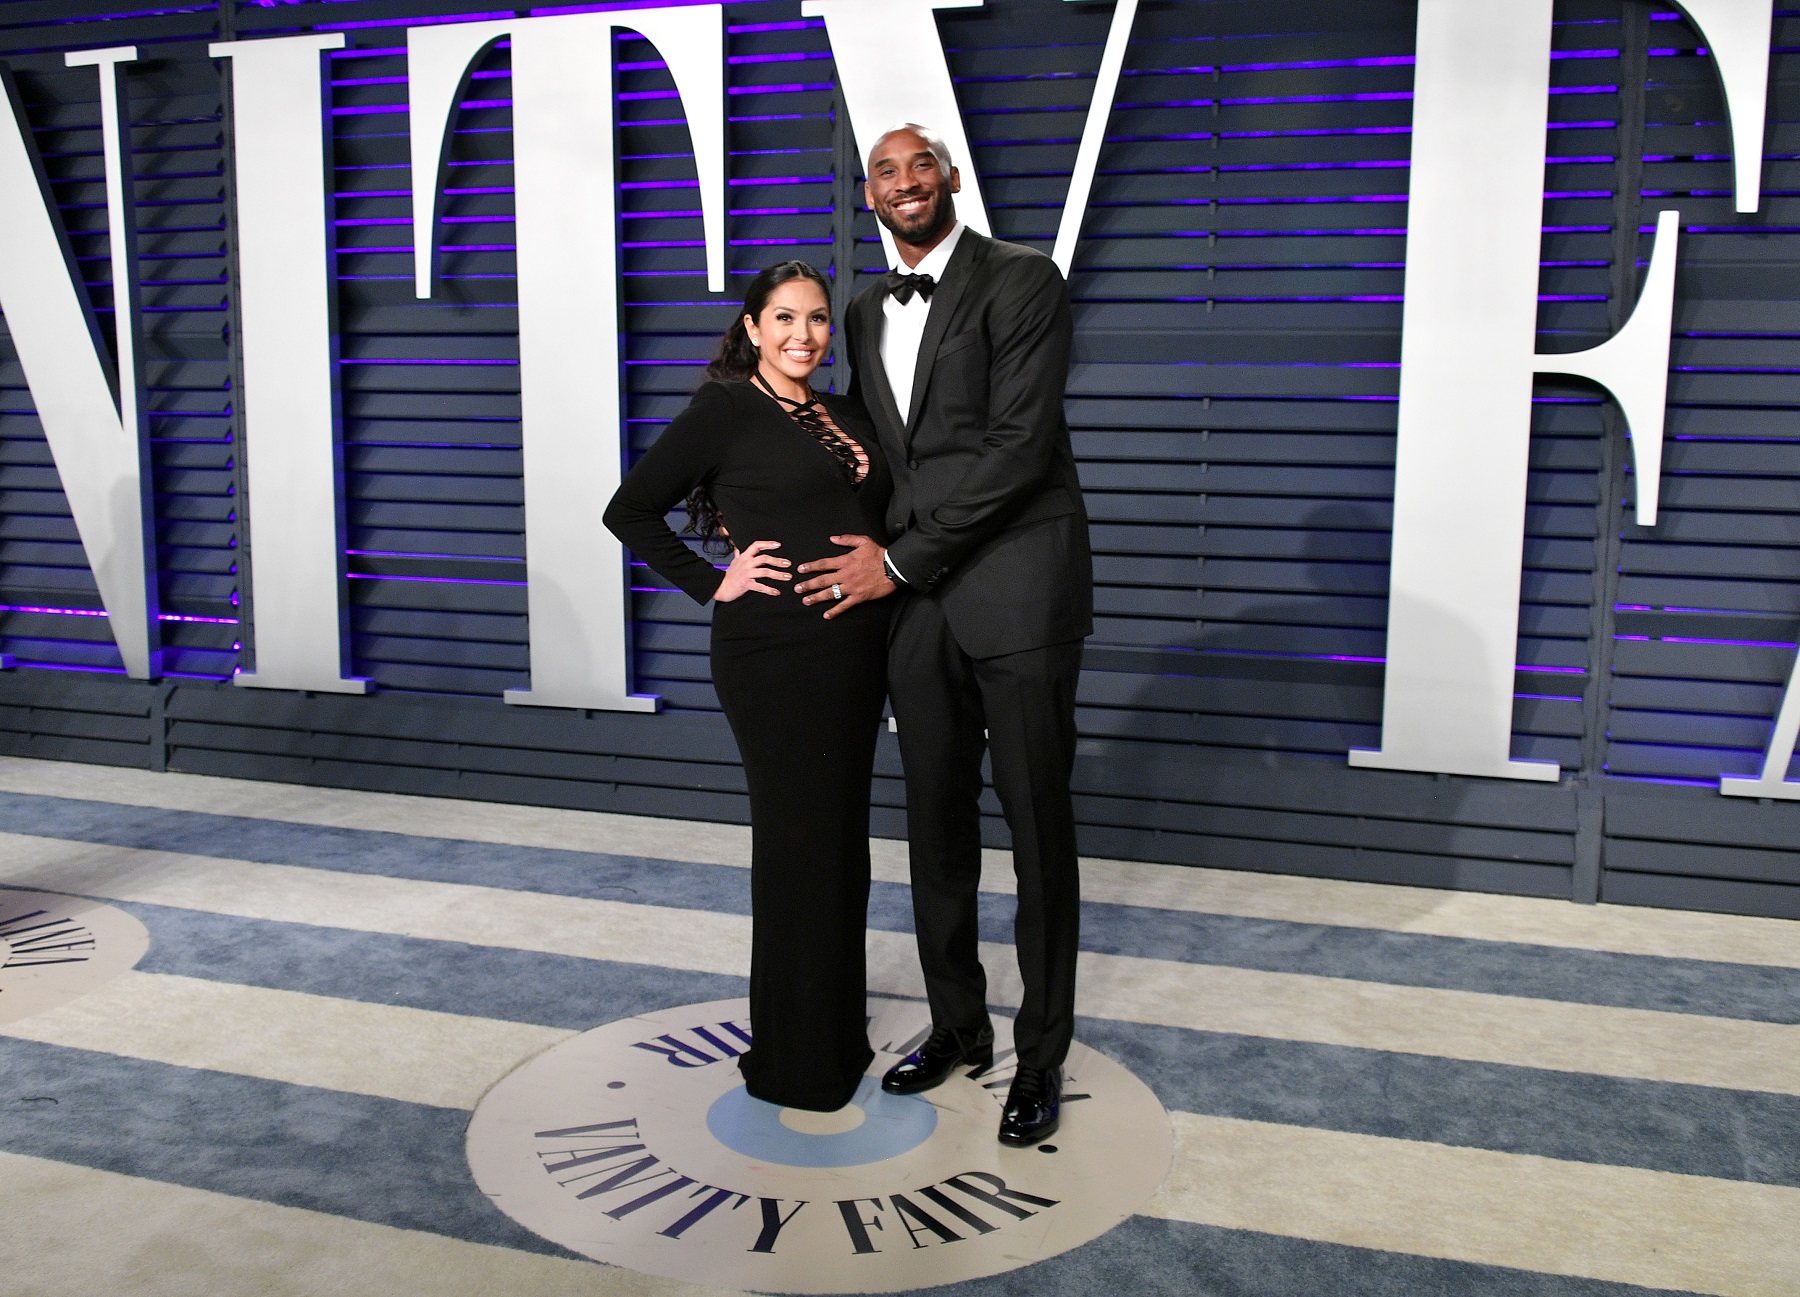 BEVERLY HILLS, CA - FEBRUARY 24:  Vanessa Laine Bryant (L) and Kobe Bryant attend the 2019 Vanity Fair Oscar Party hosted by Radhika Jones at Wallis Annenberg Center for the Performing Arts on February 24, 2019 in Beverly Hills, California.  (Photo by Dia Dipasupil/Getty Images)